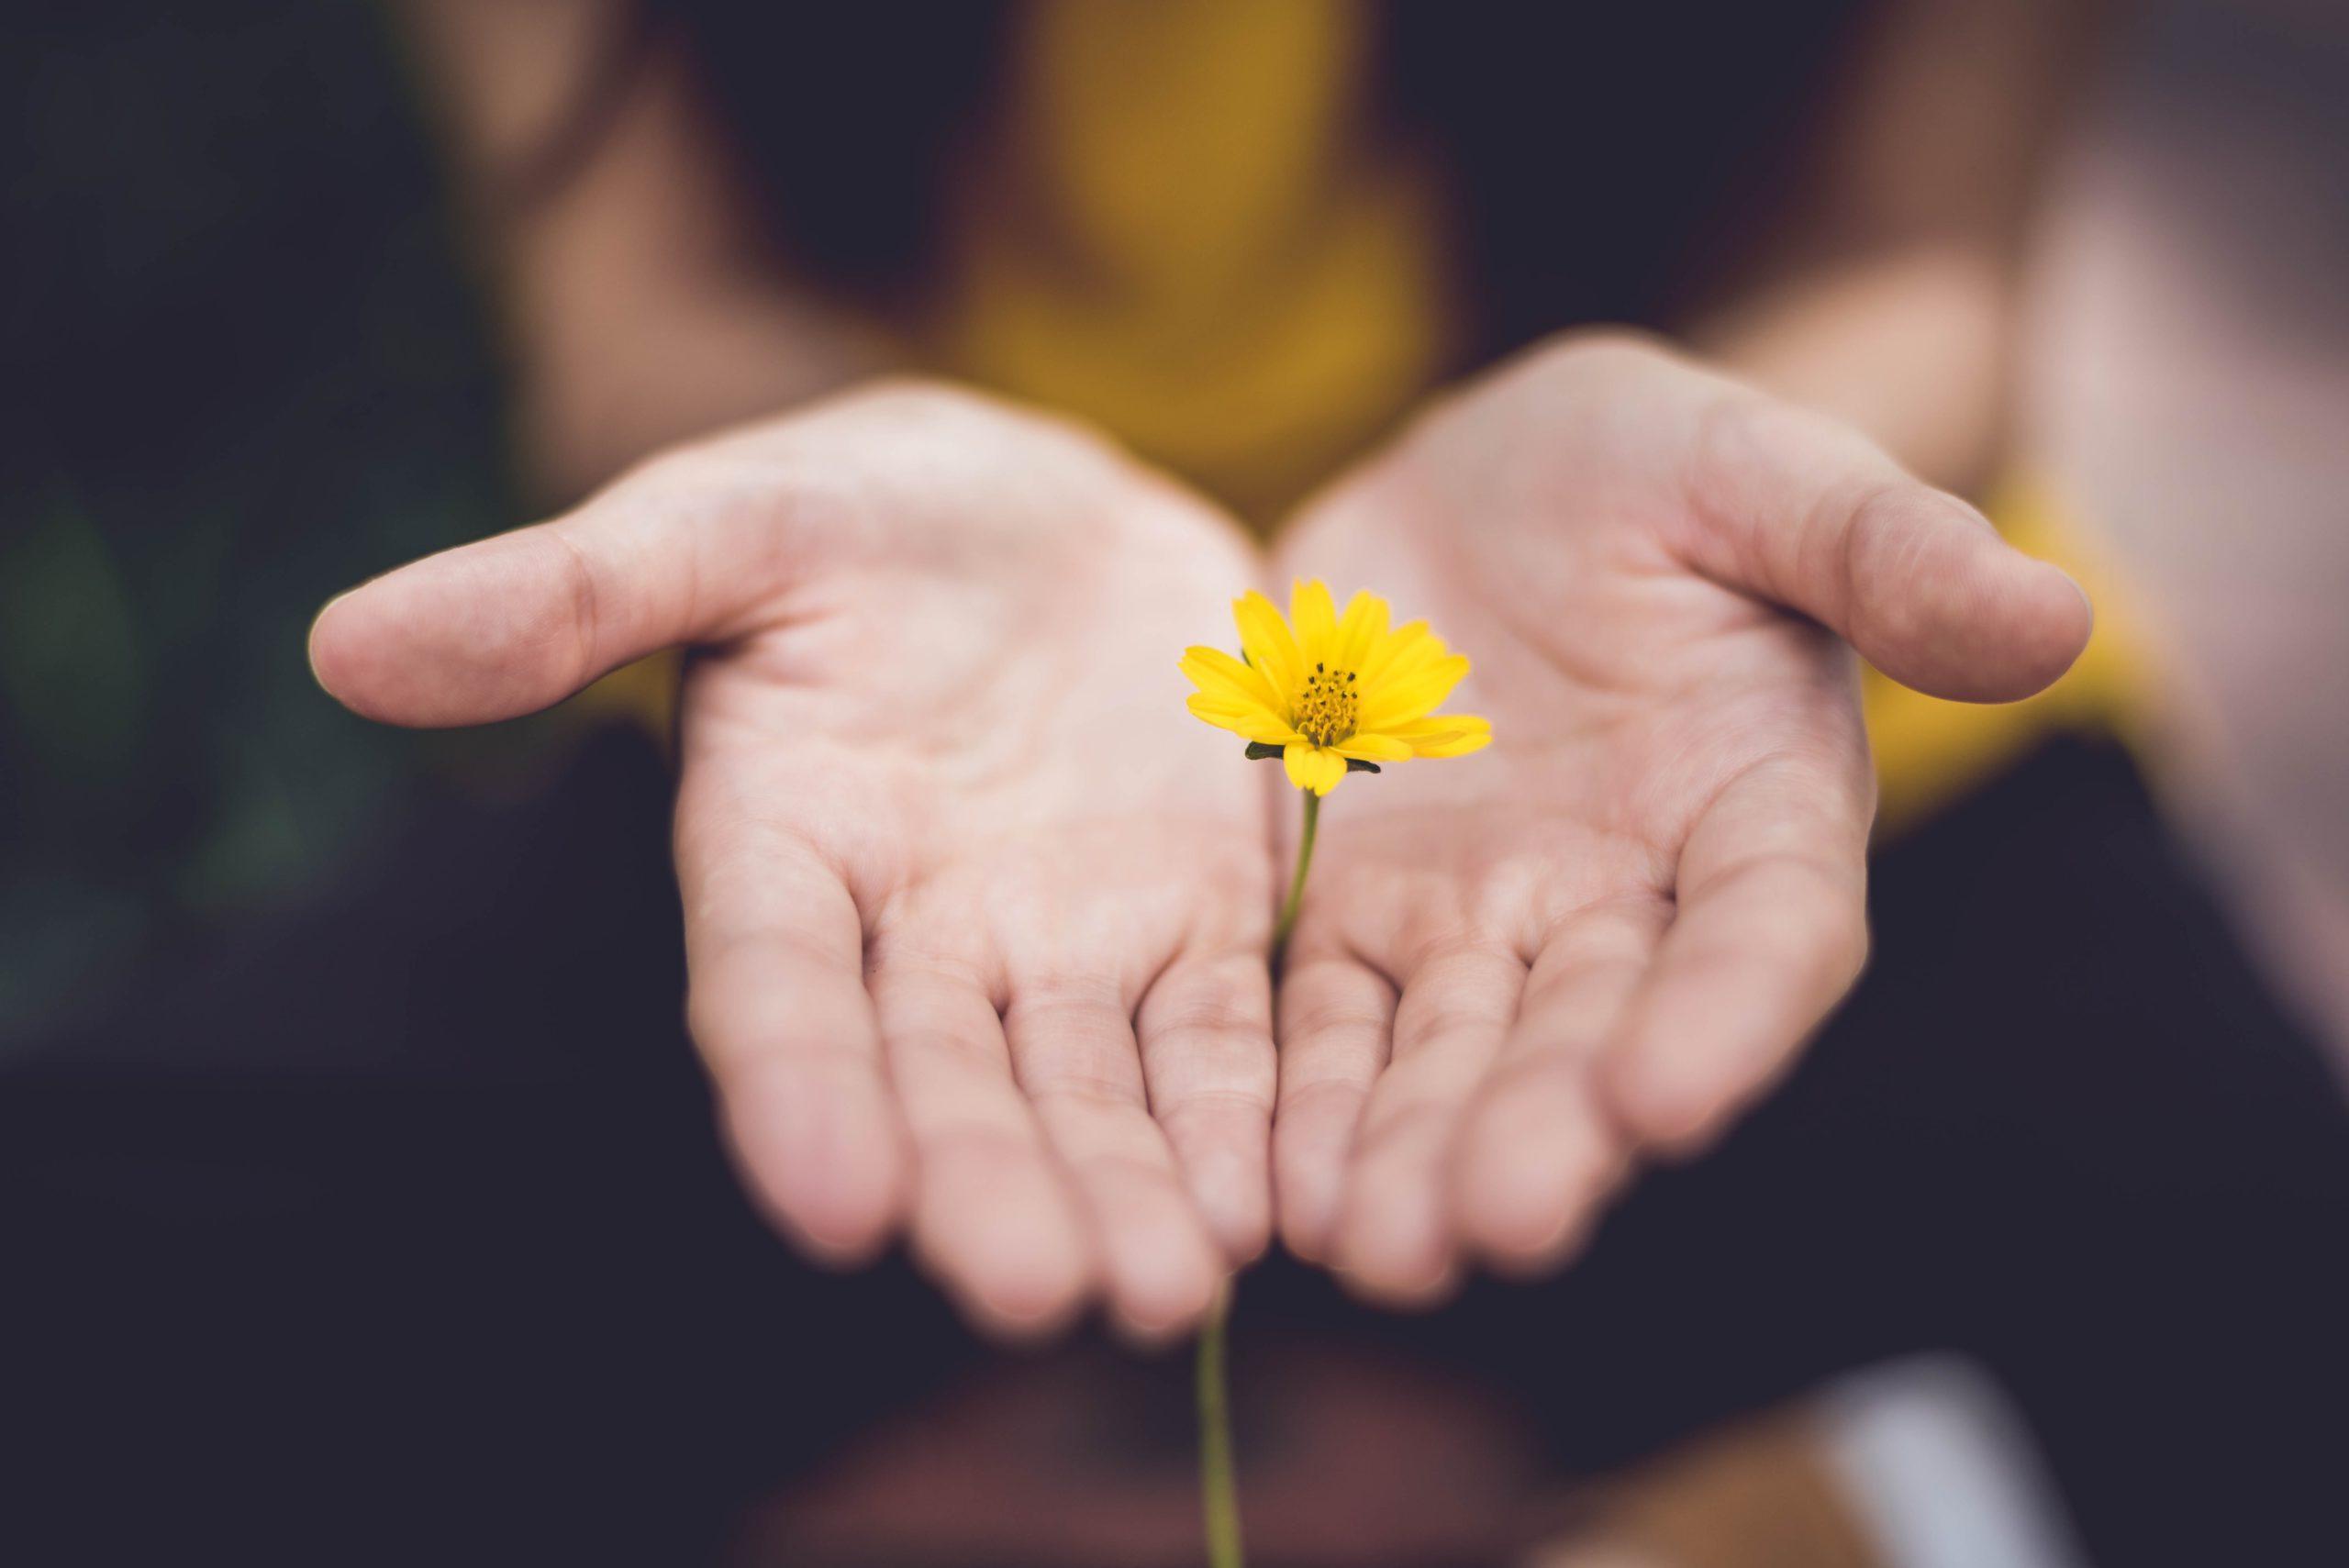 A pair of hands, palms facing up, holding a small yellow flower